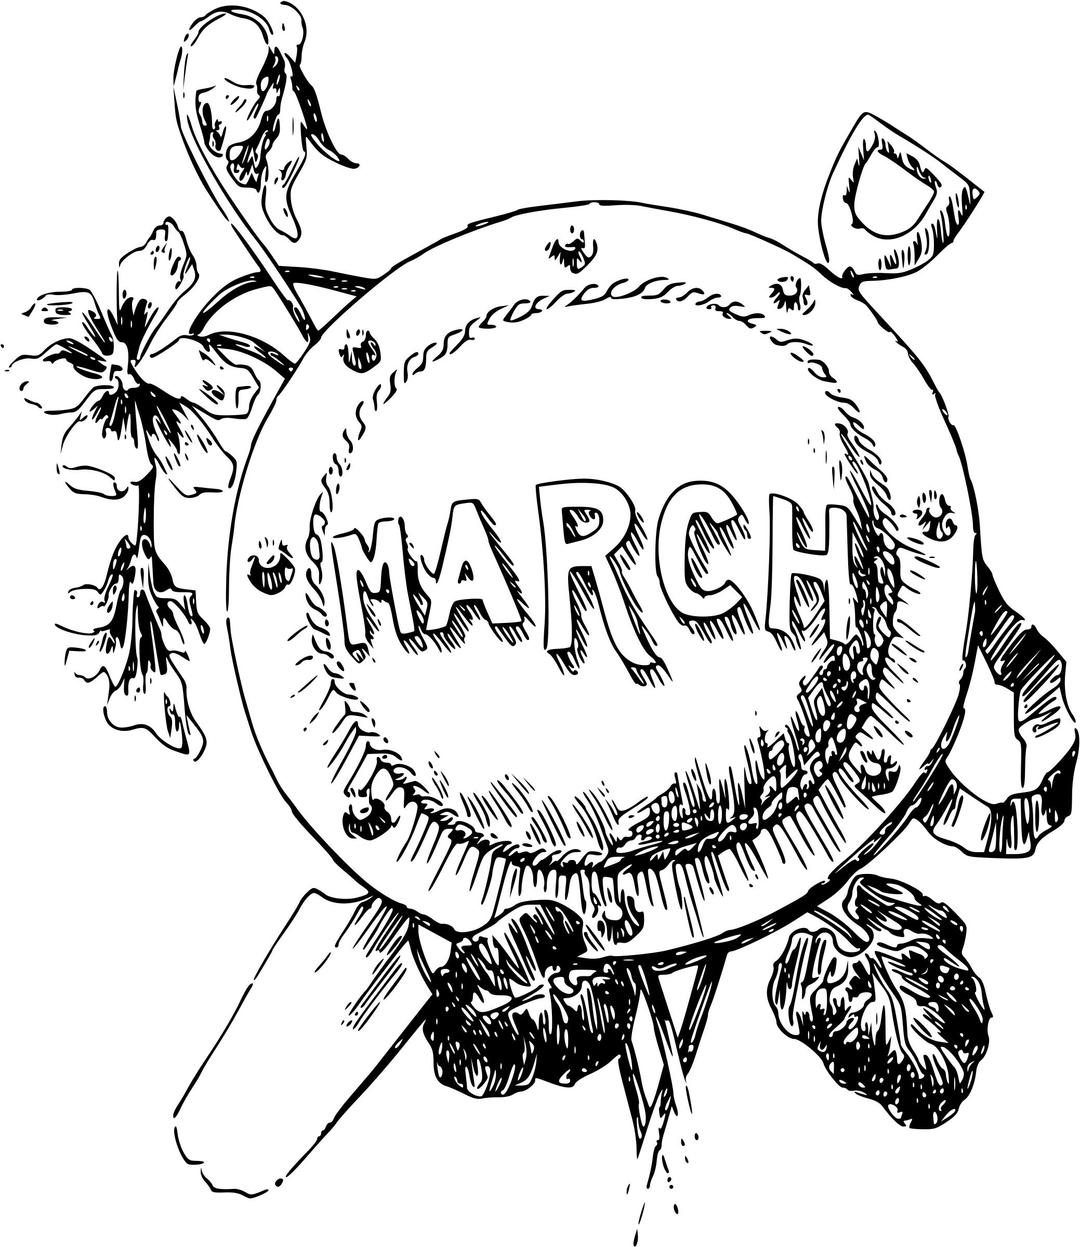 Illustrated months (March) png transparent